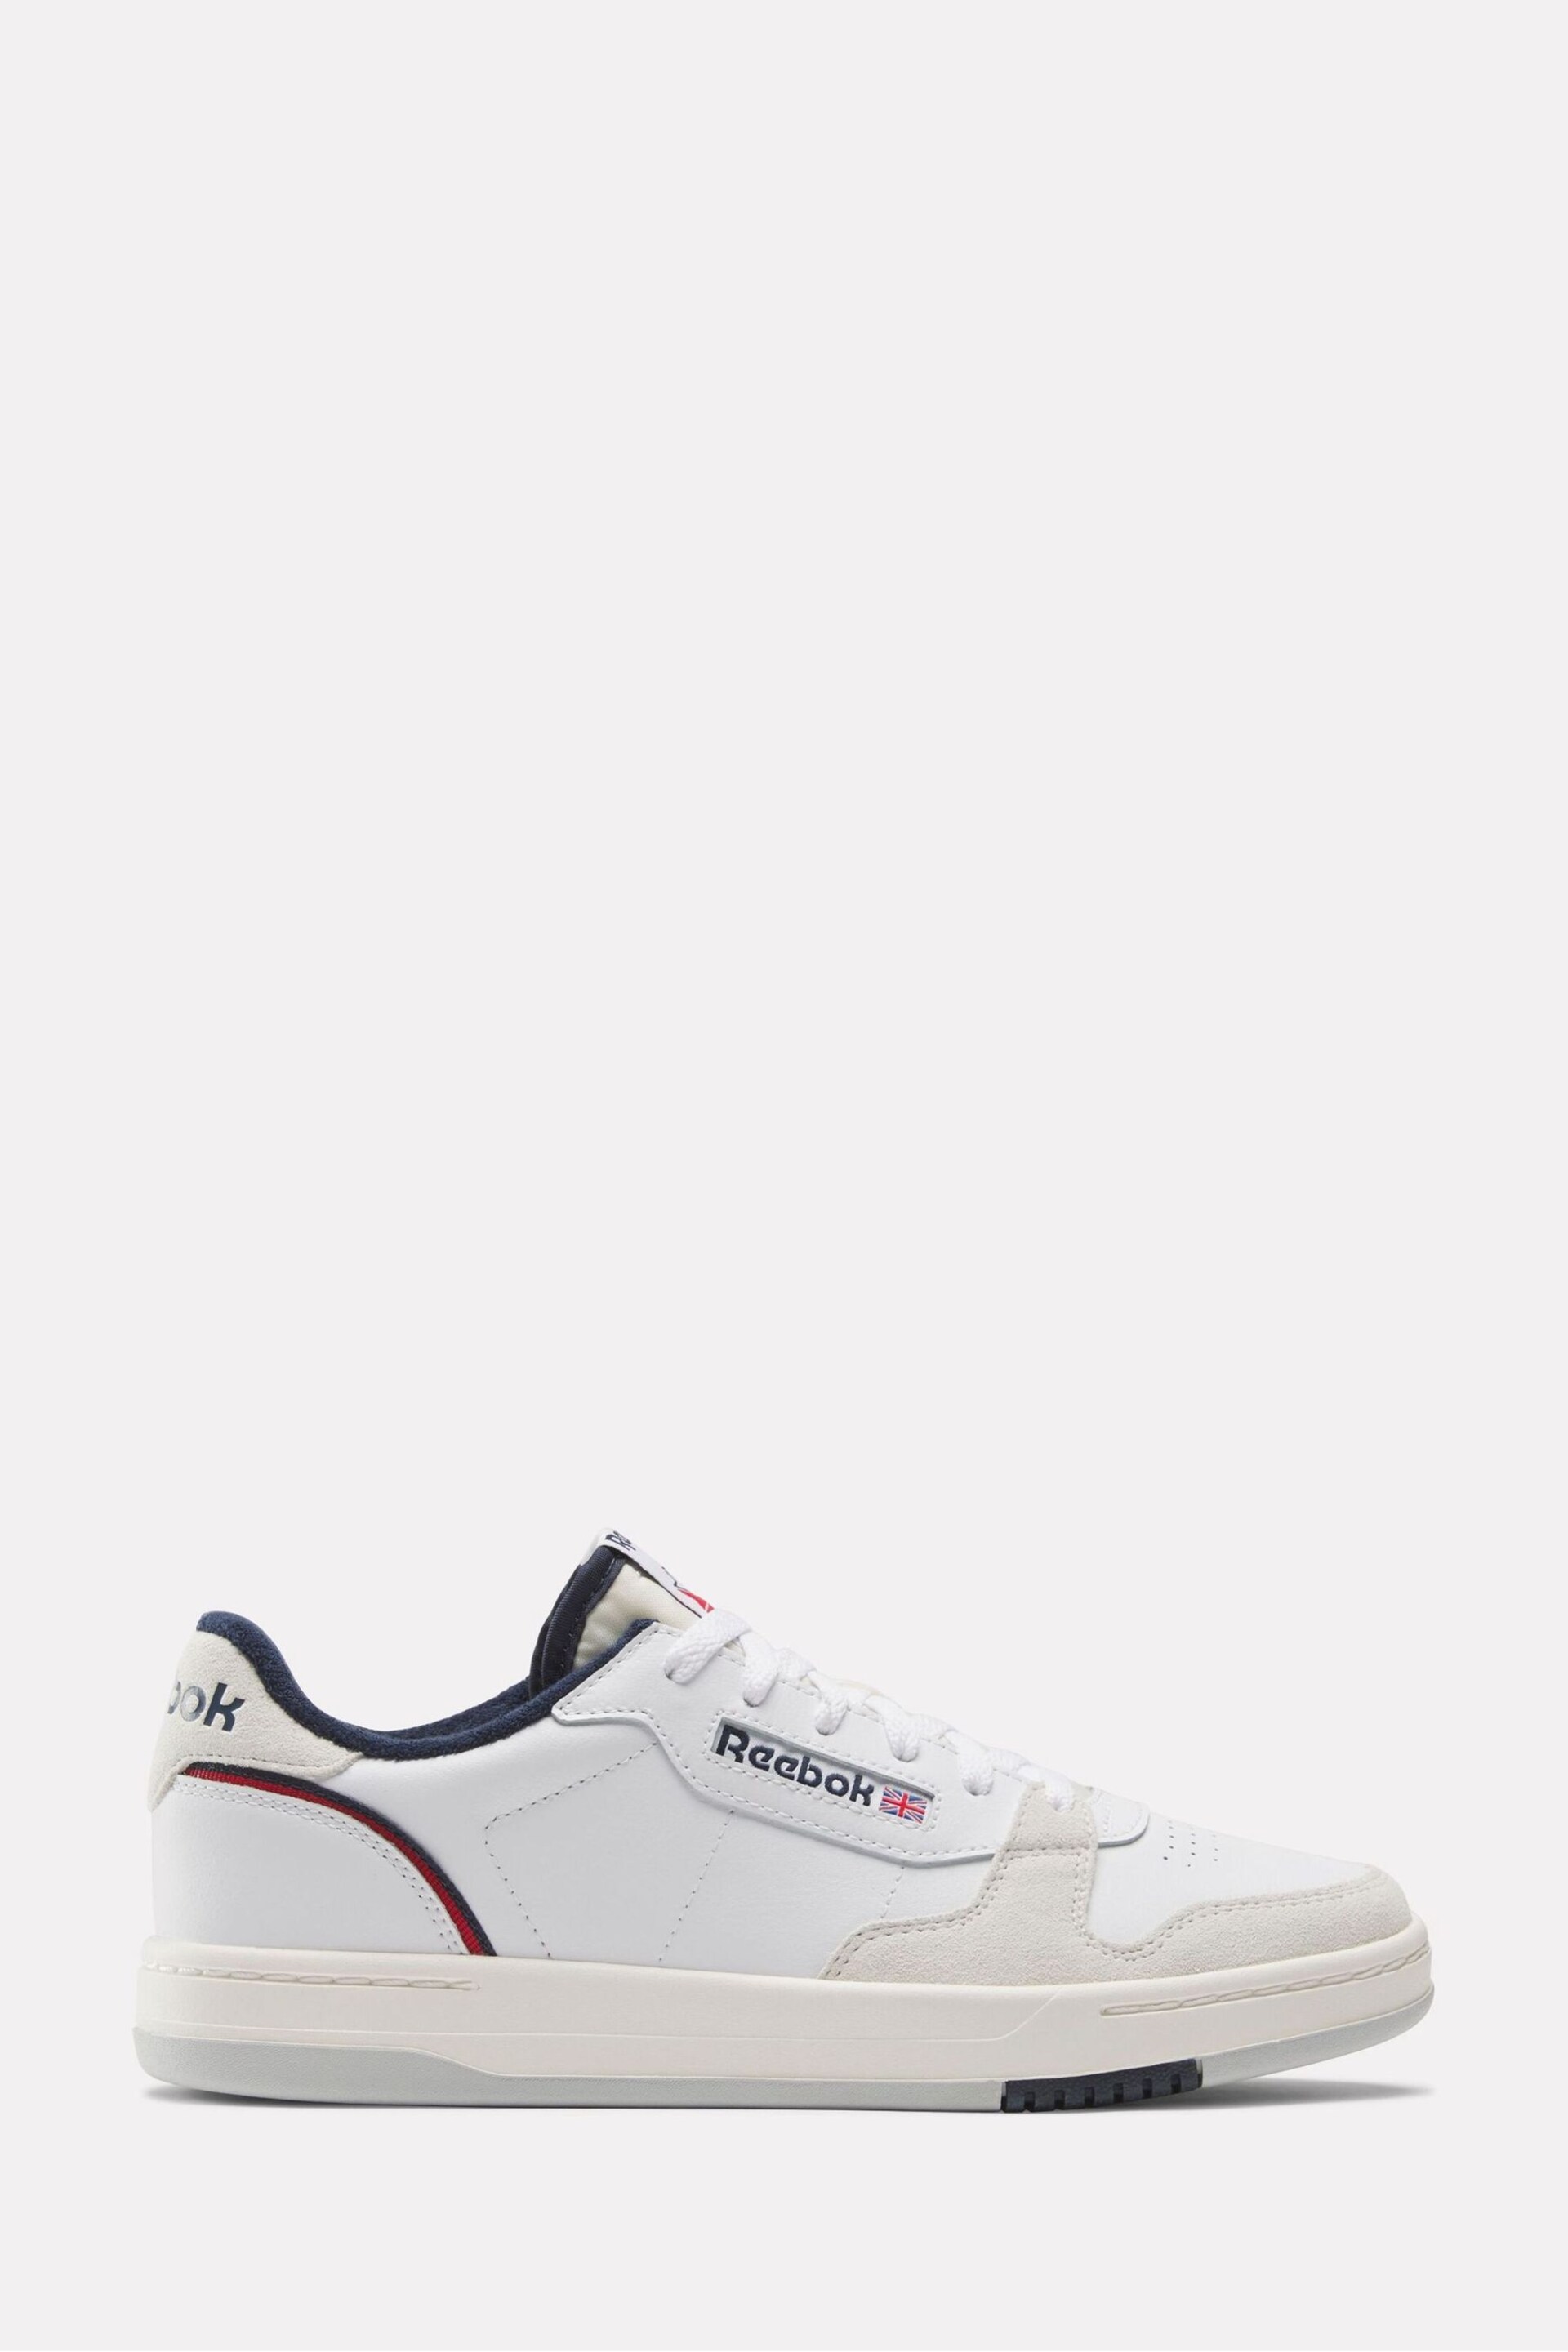 Reebok Mens Phase Court Trainers - Image 1 of 6